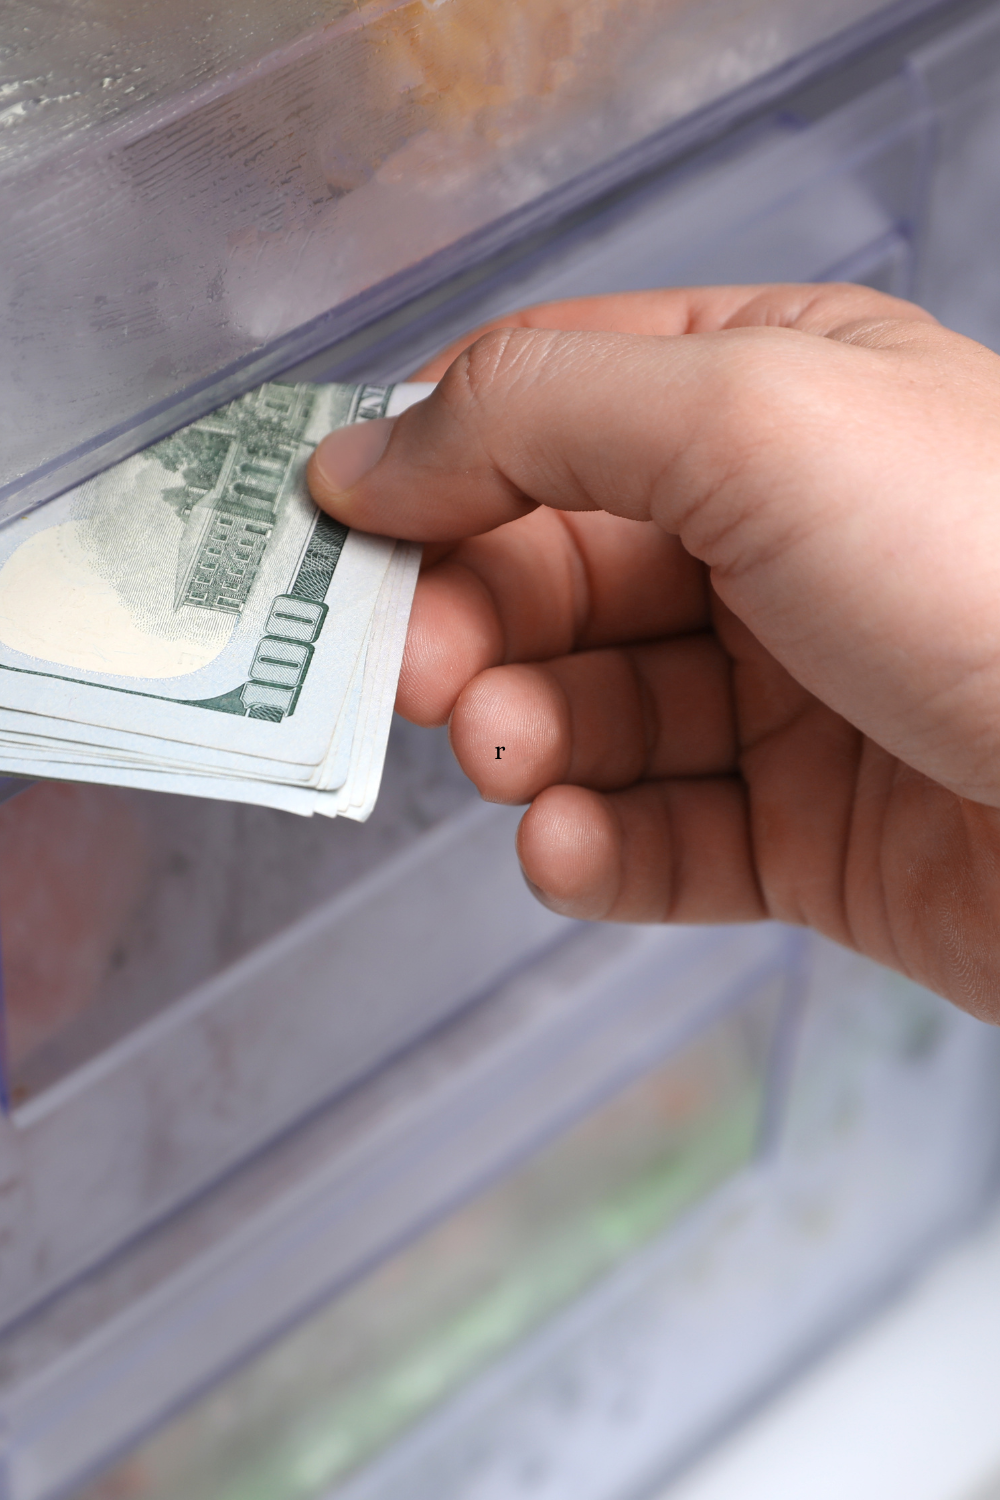 Top 7 places people hide cash at home